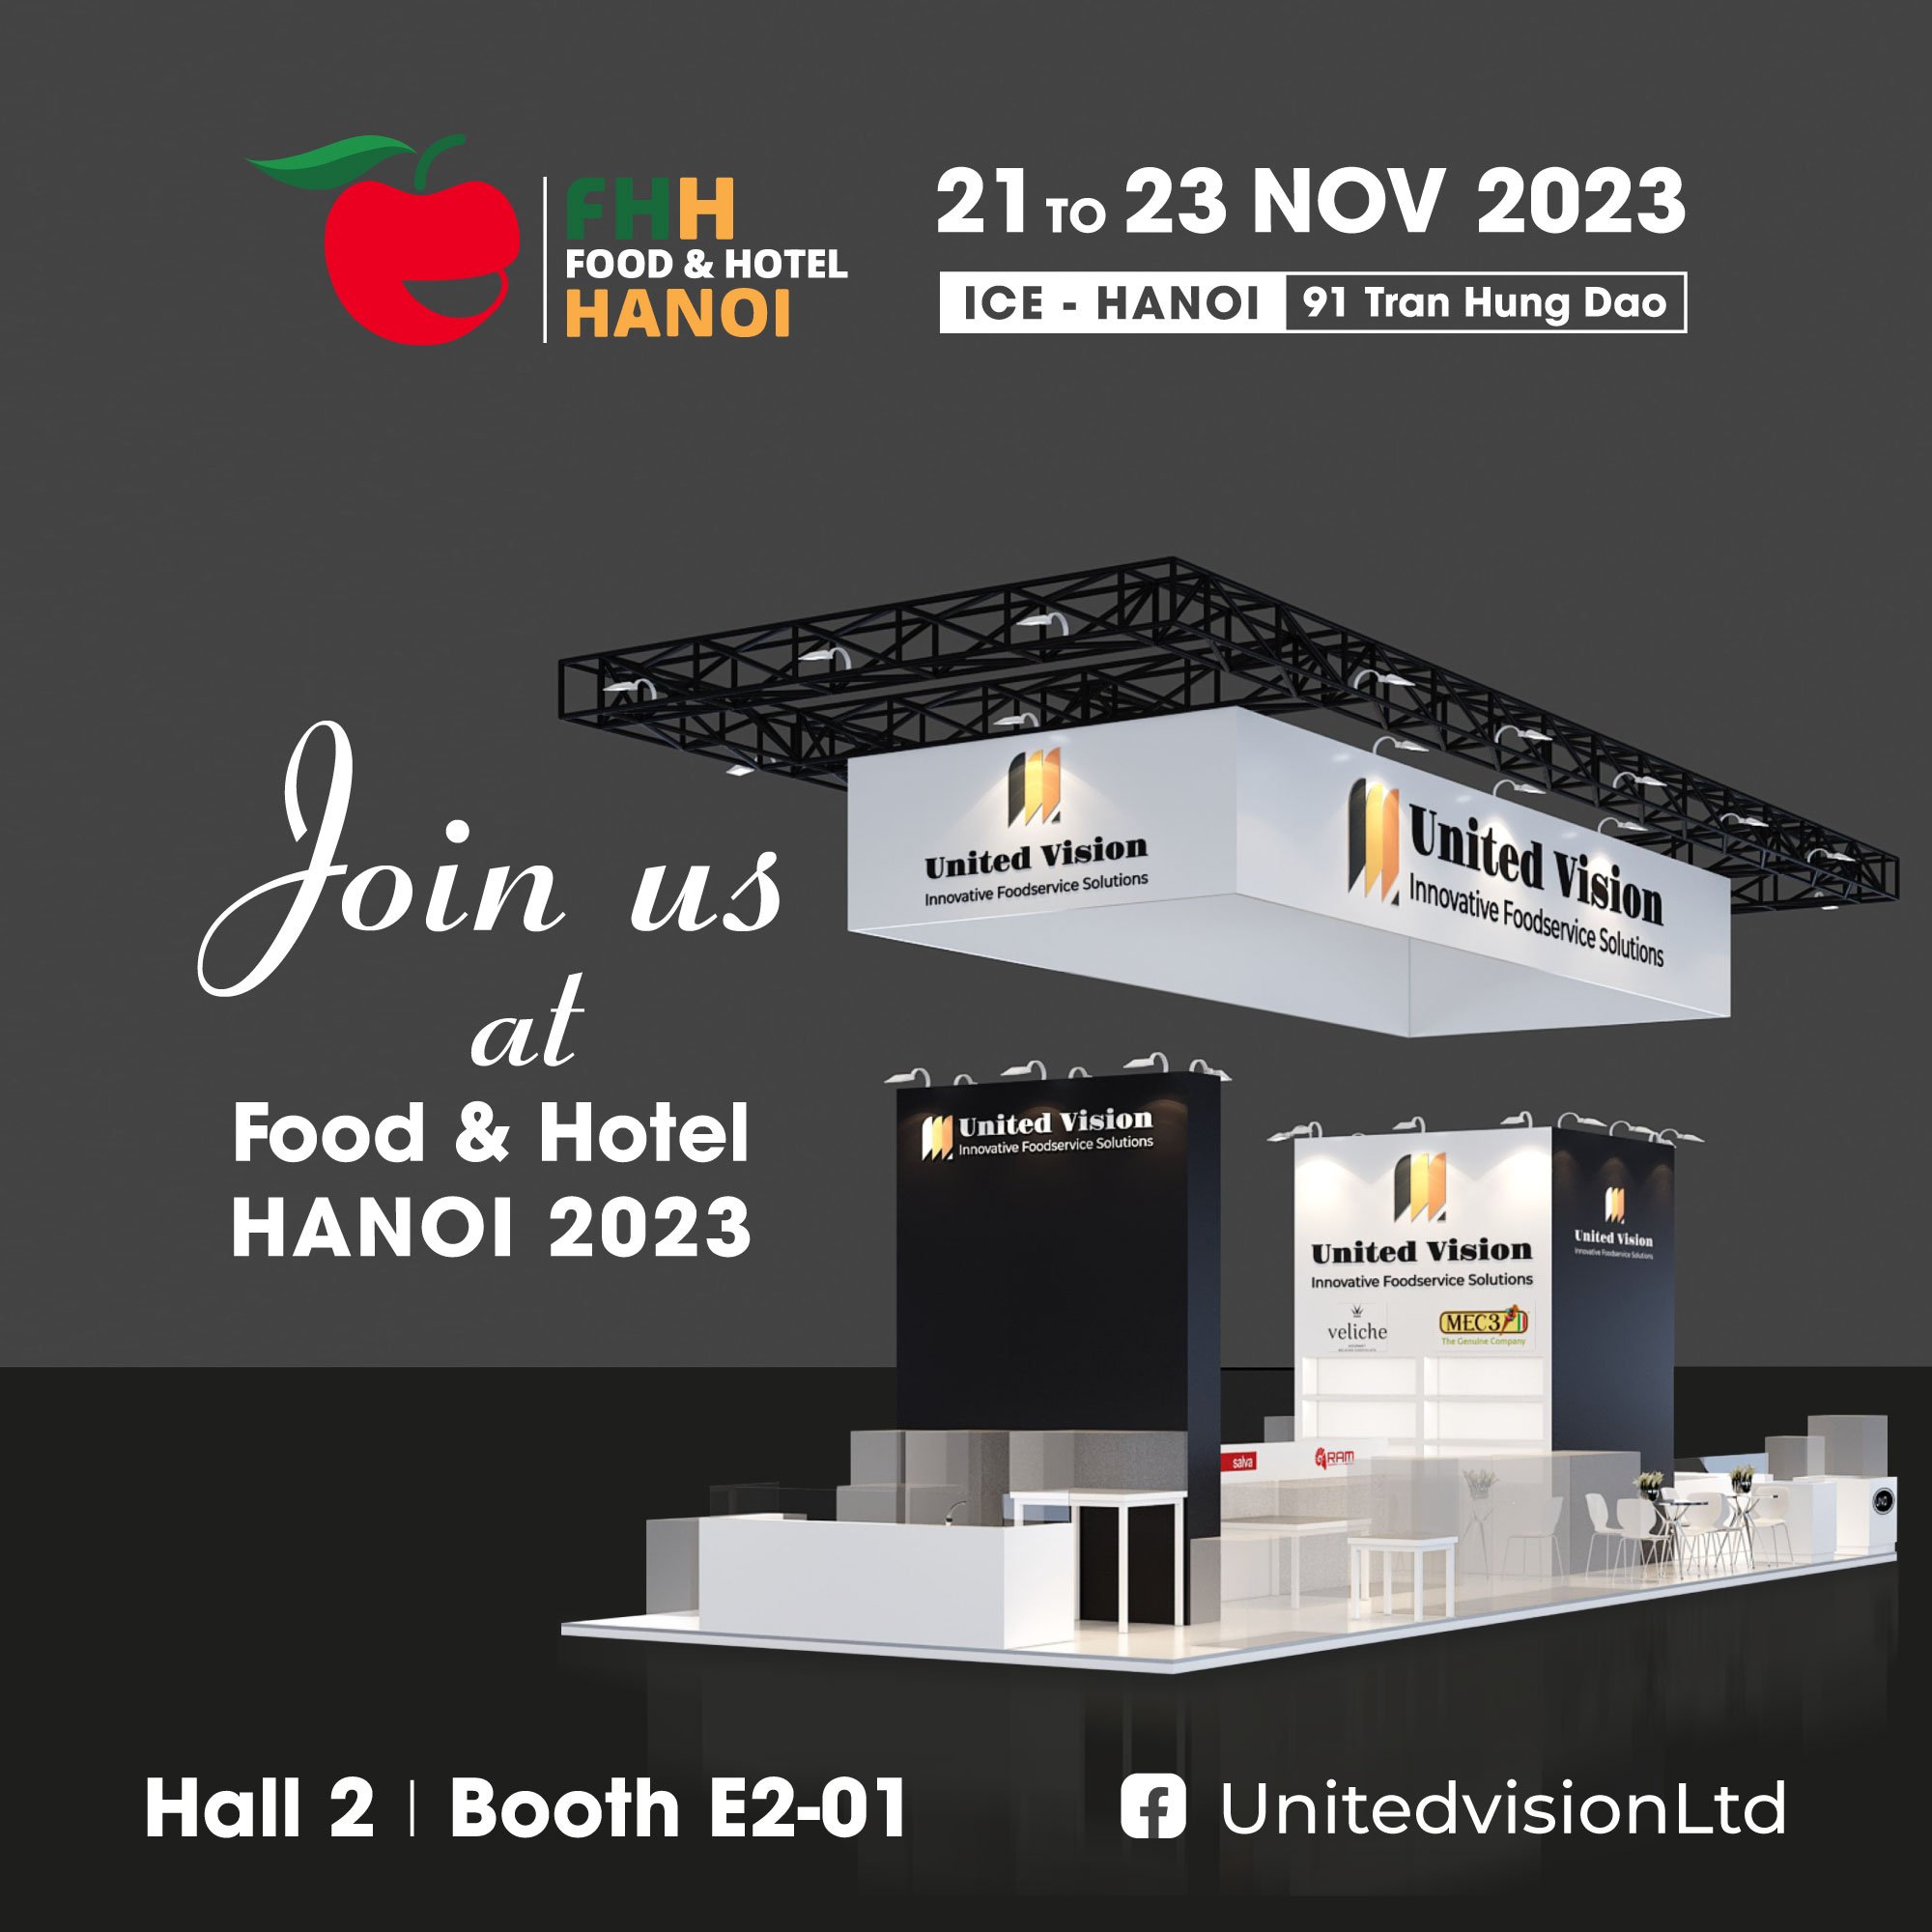 United Vision at Hanoi 2023 F&B - Food & Hotel Industry Exhibition Event